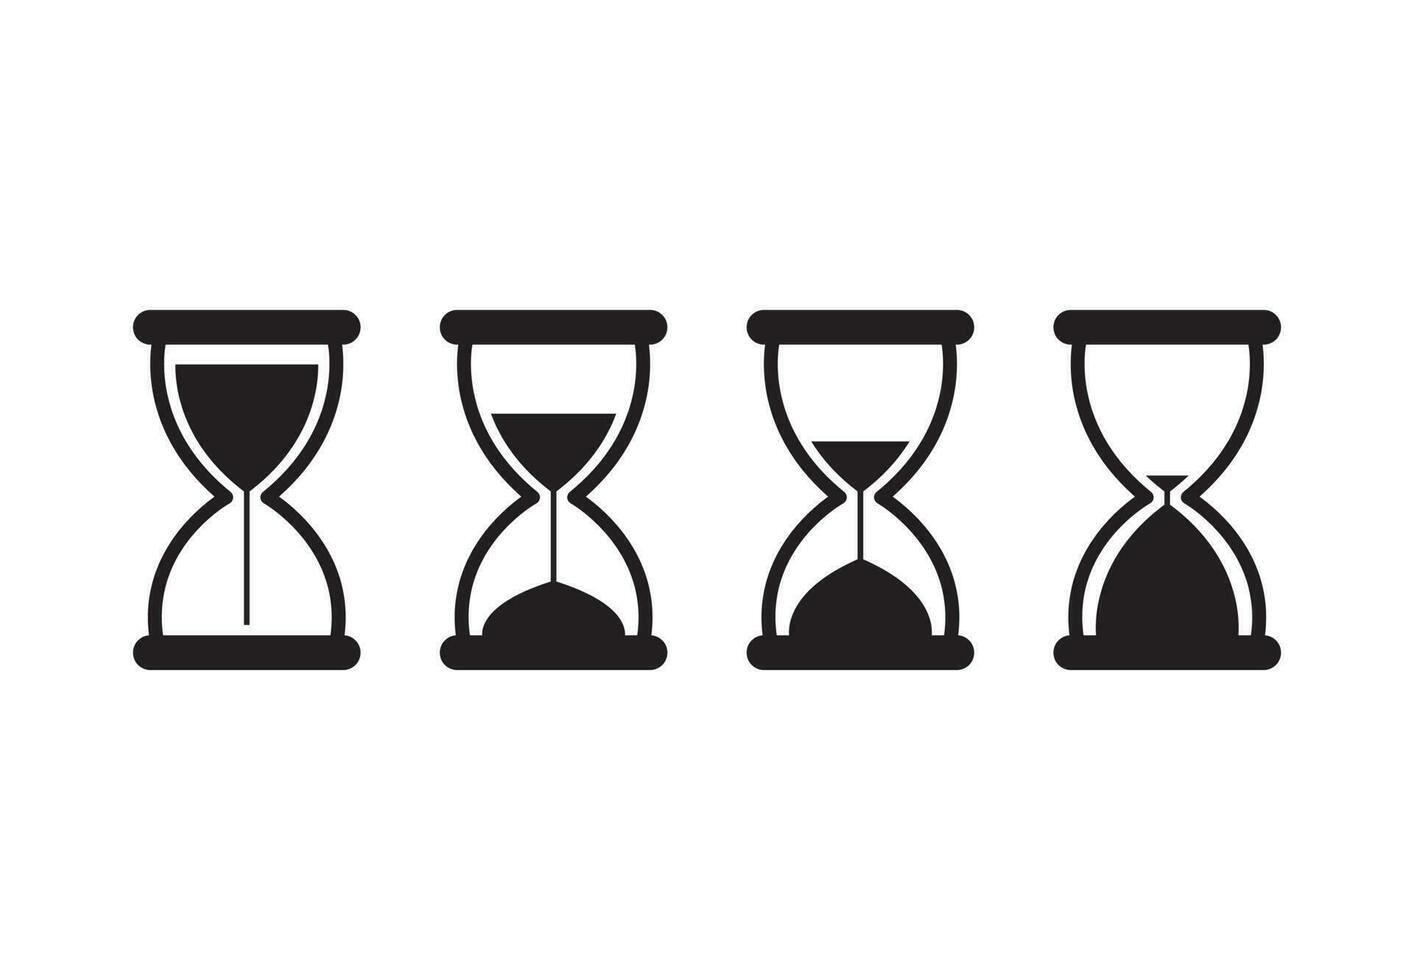 hourglass icon vector illustration graphic on background